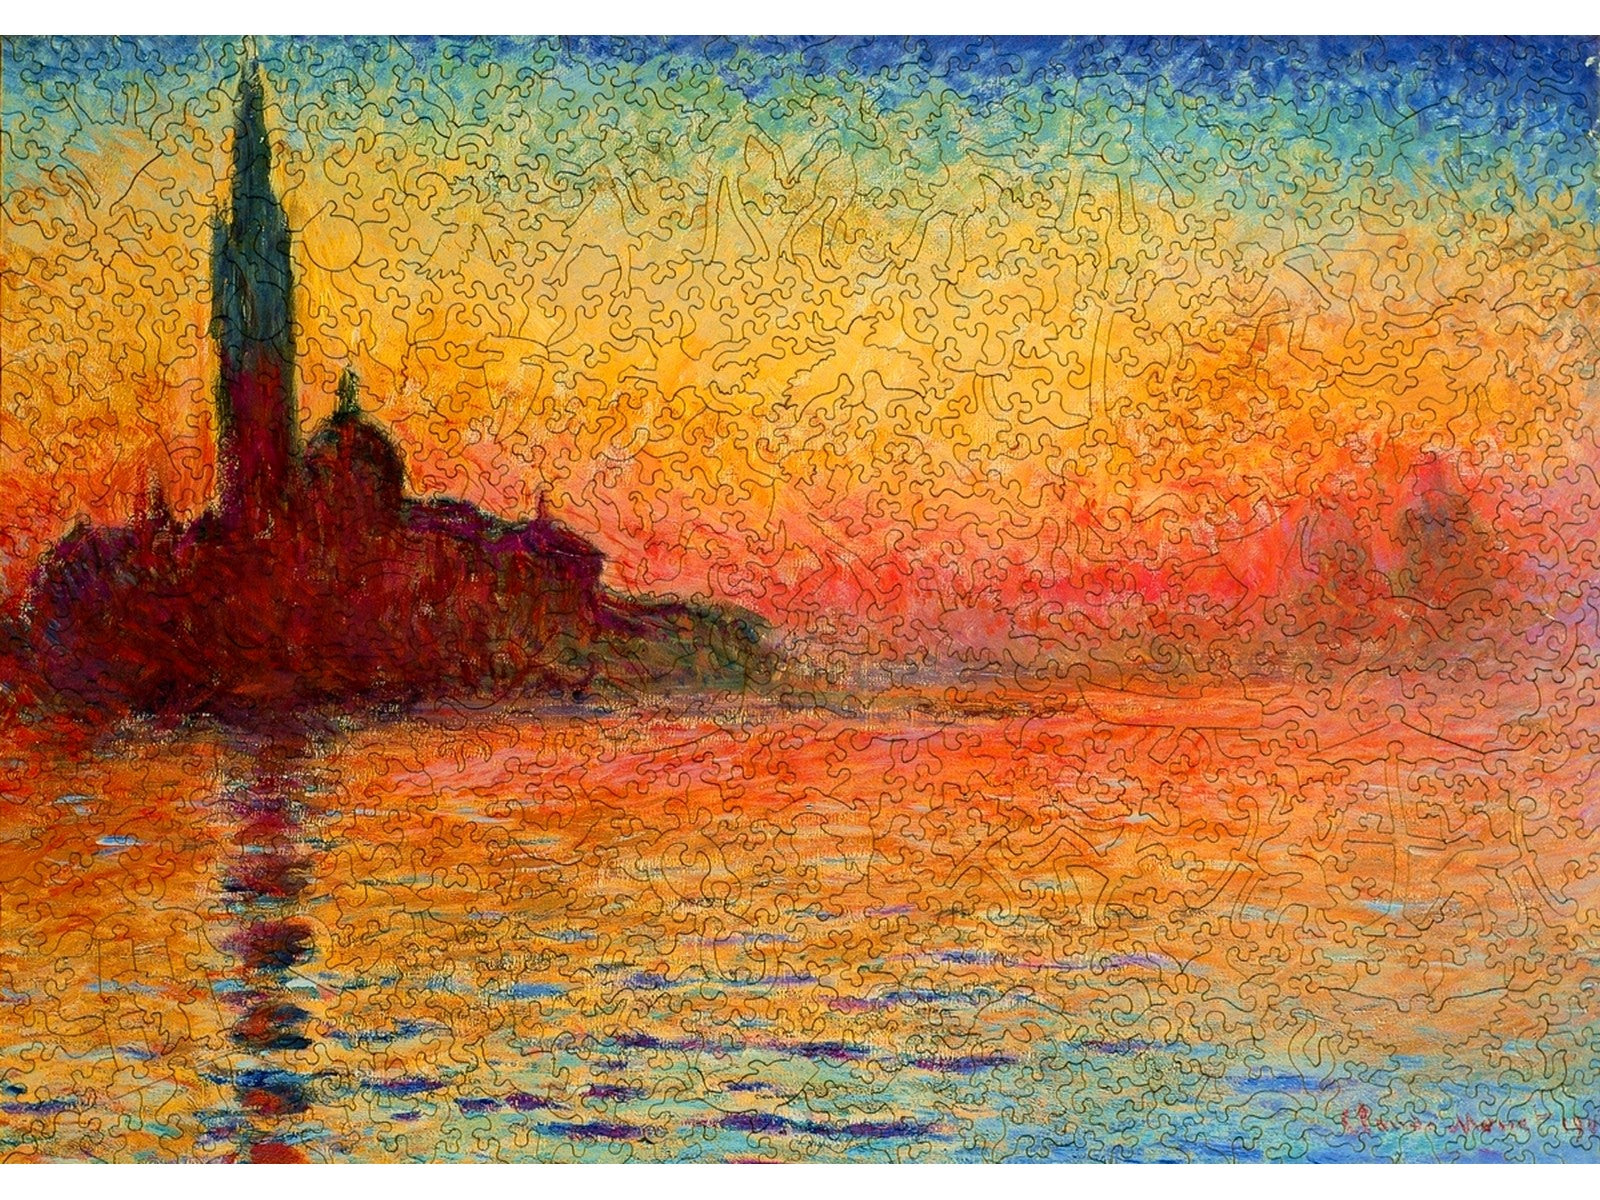 The front of the puzzle, San Giorgio Maggiore at Dusk, which shows the silhouette of a castle at sunset.